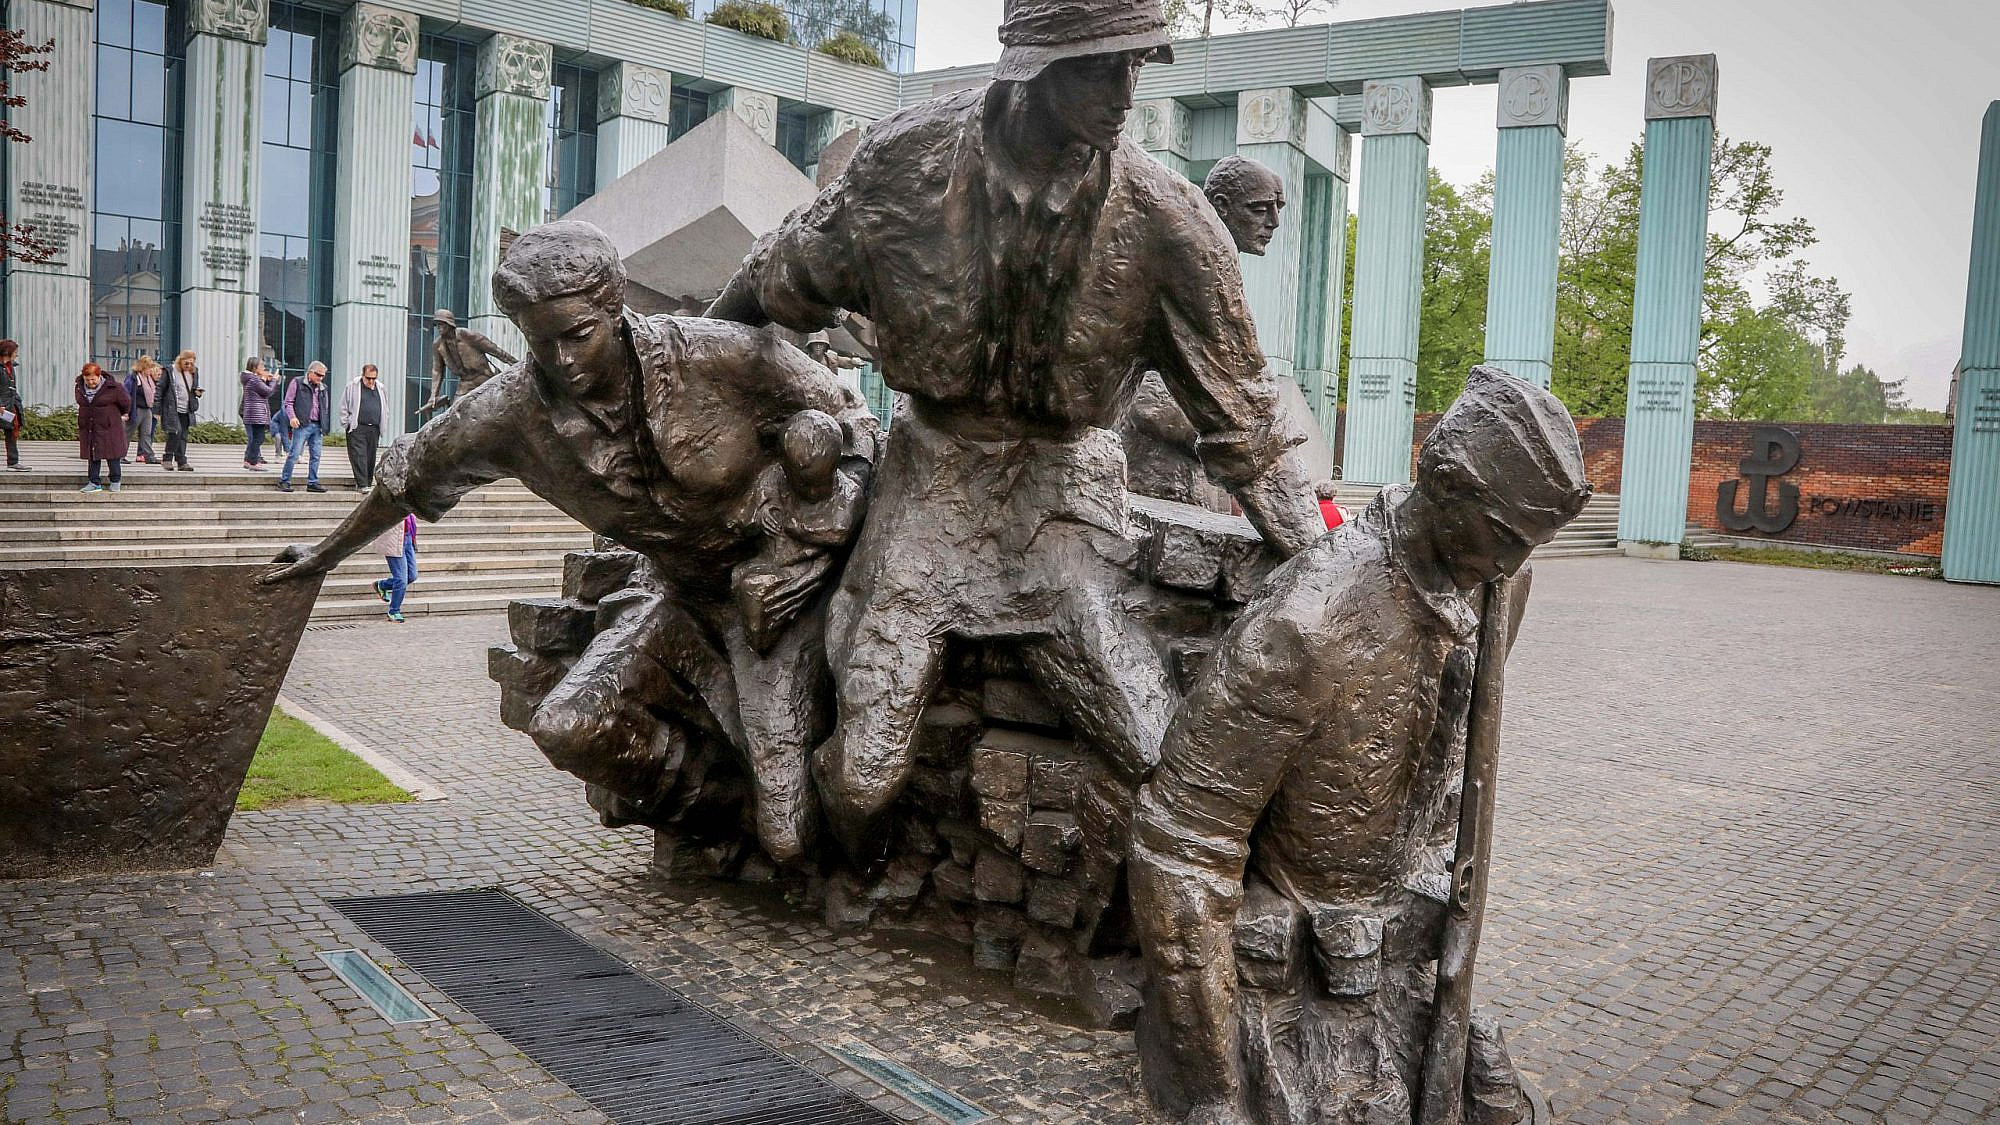 Monument to the Warsaw Uprising Fighters located in a part of the former Warsaw Ghetto. Photo by Isaac Harari/Flash90.